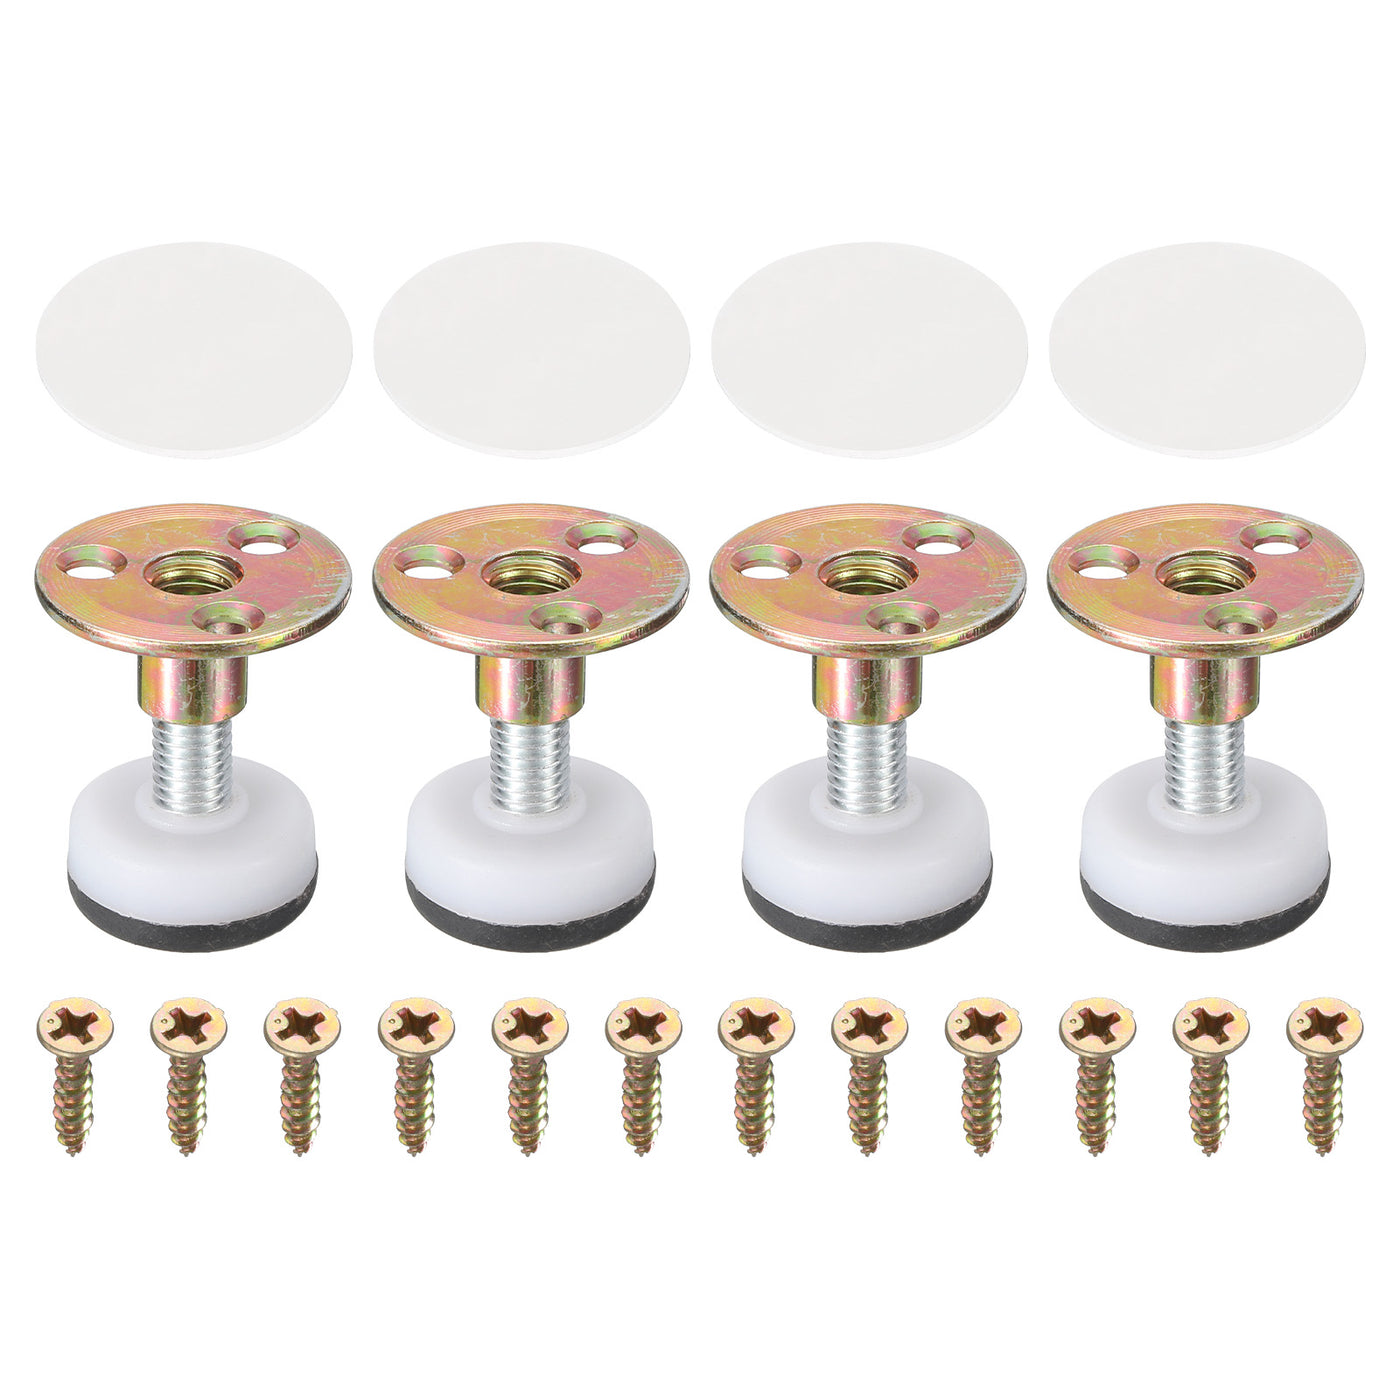 uxcell Uxcell Thread Furniture Leveling Feet, 4Pcs - Adjustable Furniture Feet Levelers, Self-adhesive Threaded Screw-in Raised Base for Tables Sofas (30 x 13 MM)